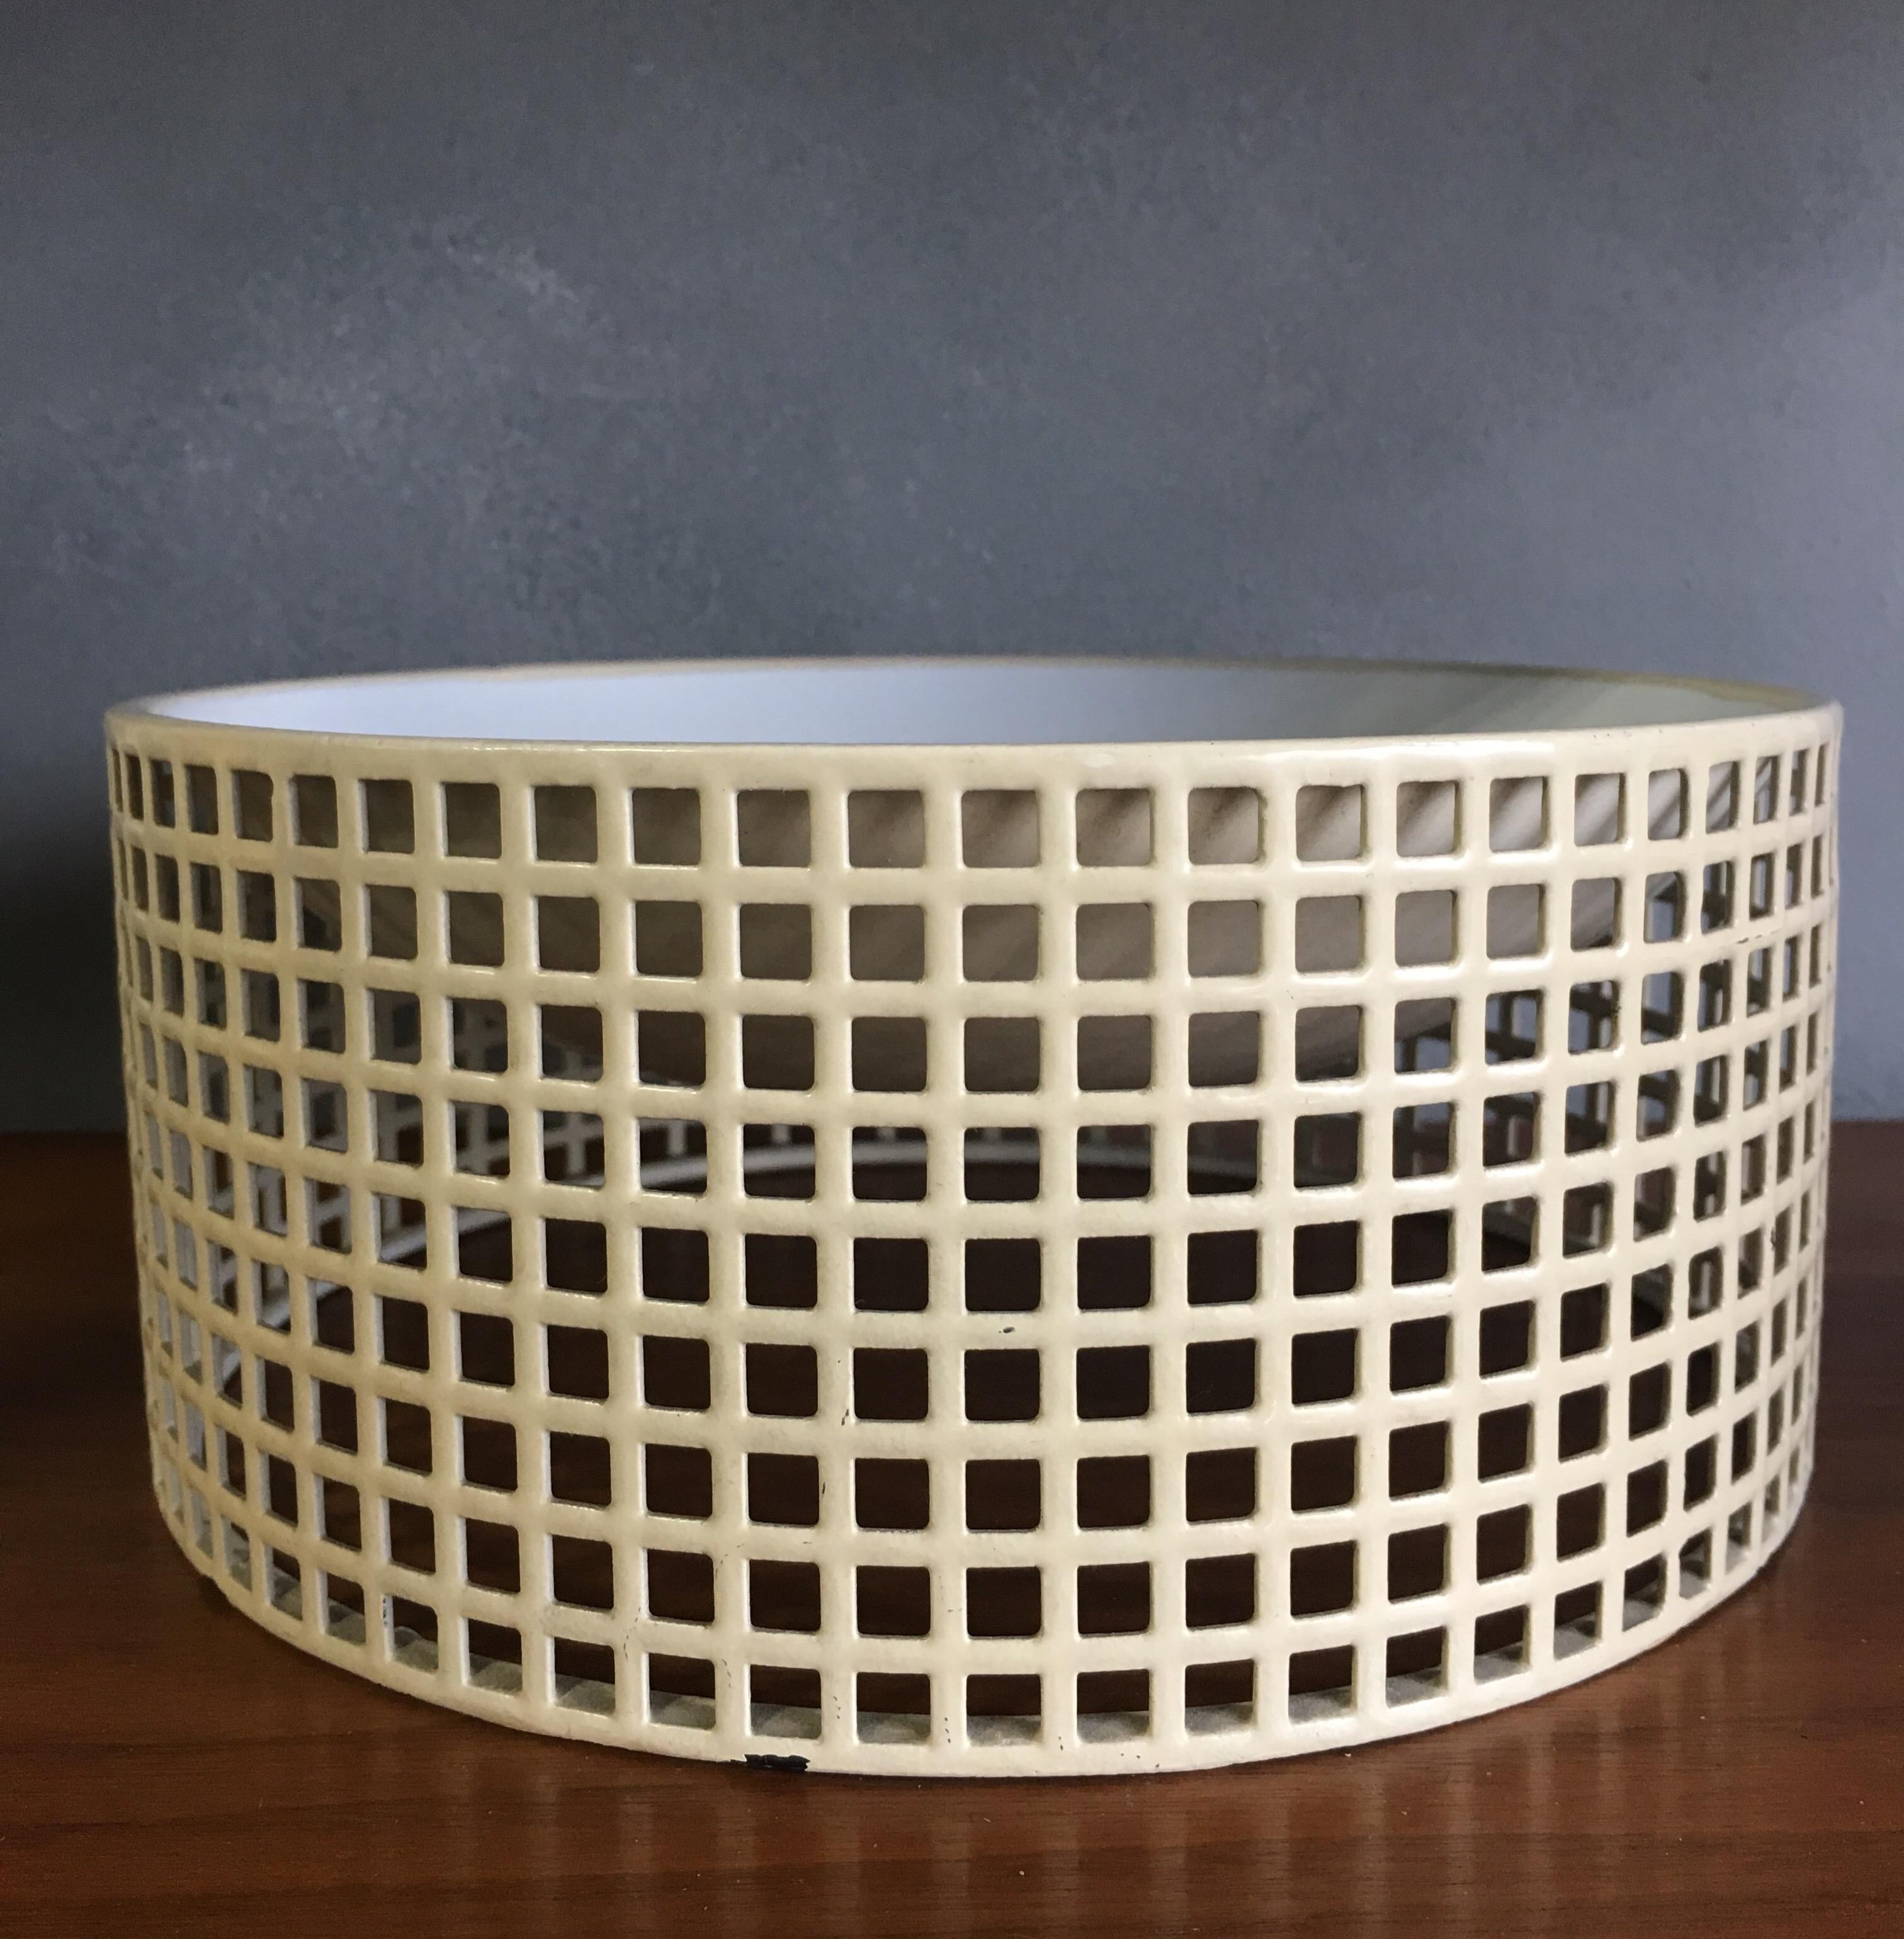 Elegant and strikingly minimal designs by Josef Hoffmann. 

The bowl height is 3 inches- the width is 8 1/2 inches with the bottom has some edgware showing honest use.
  